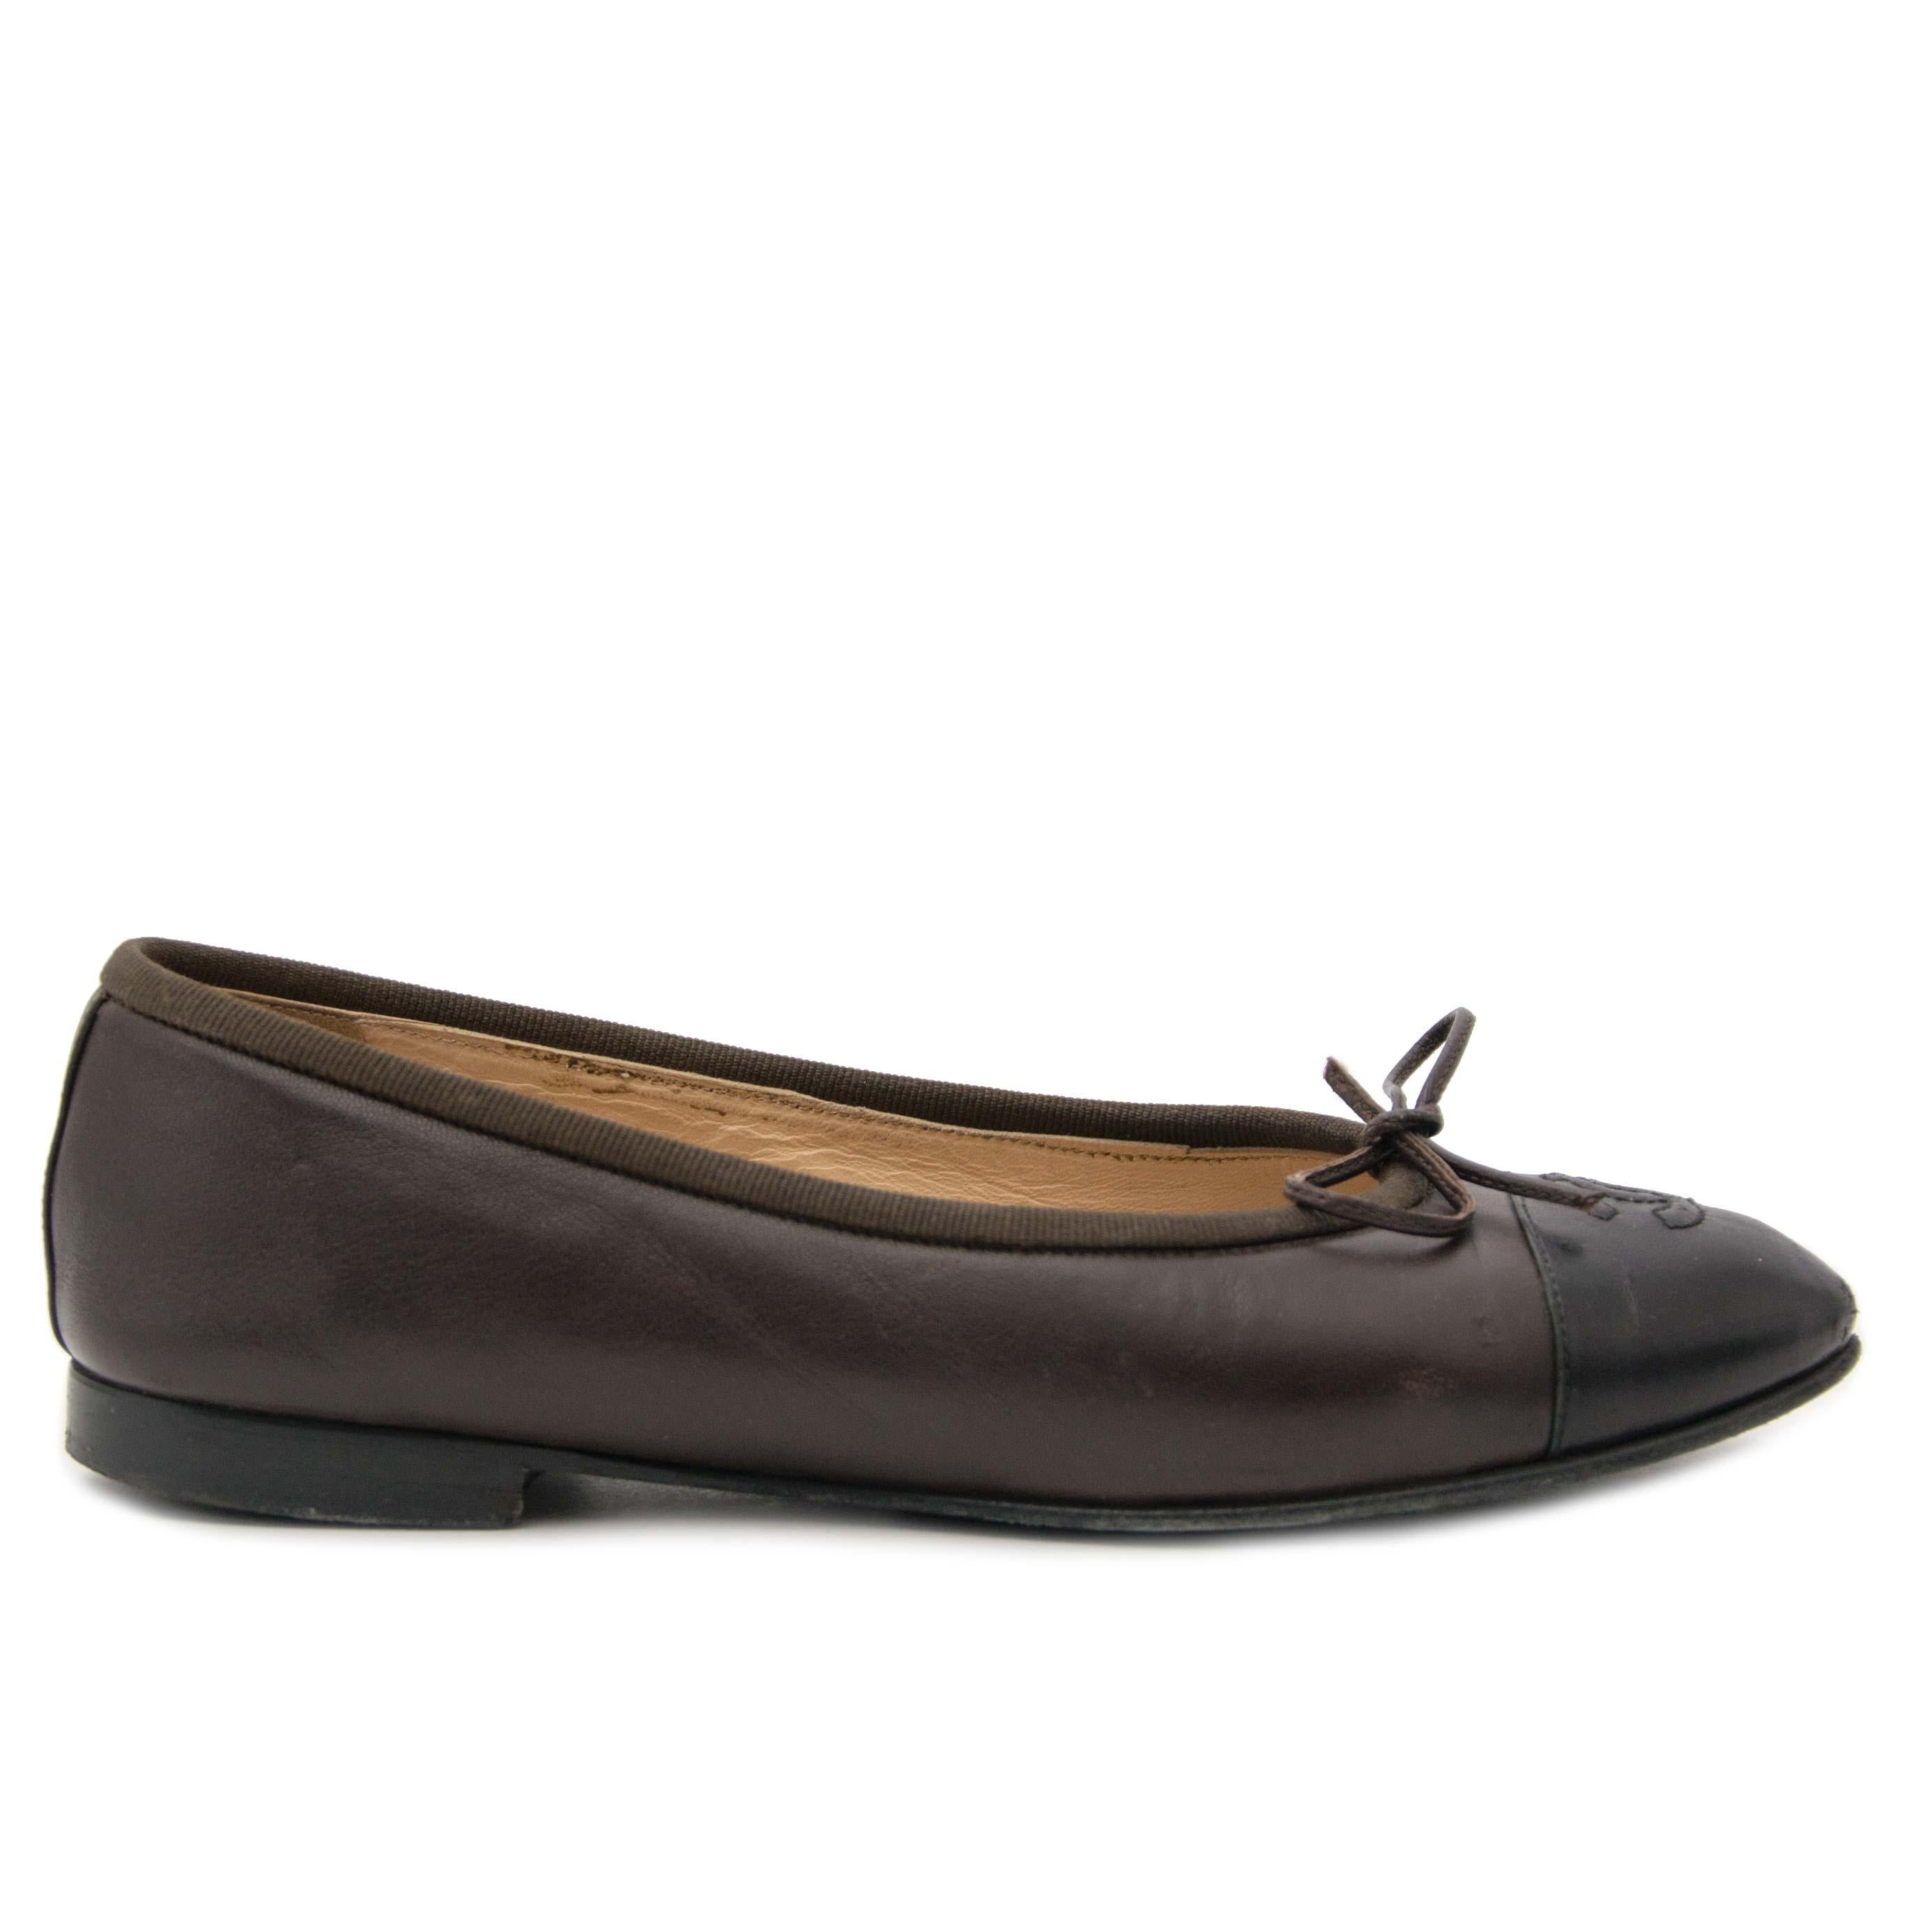 black and brown flats